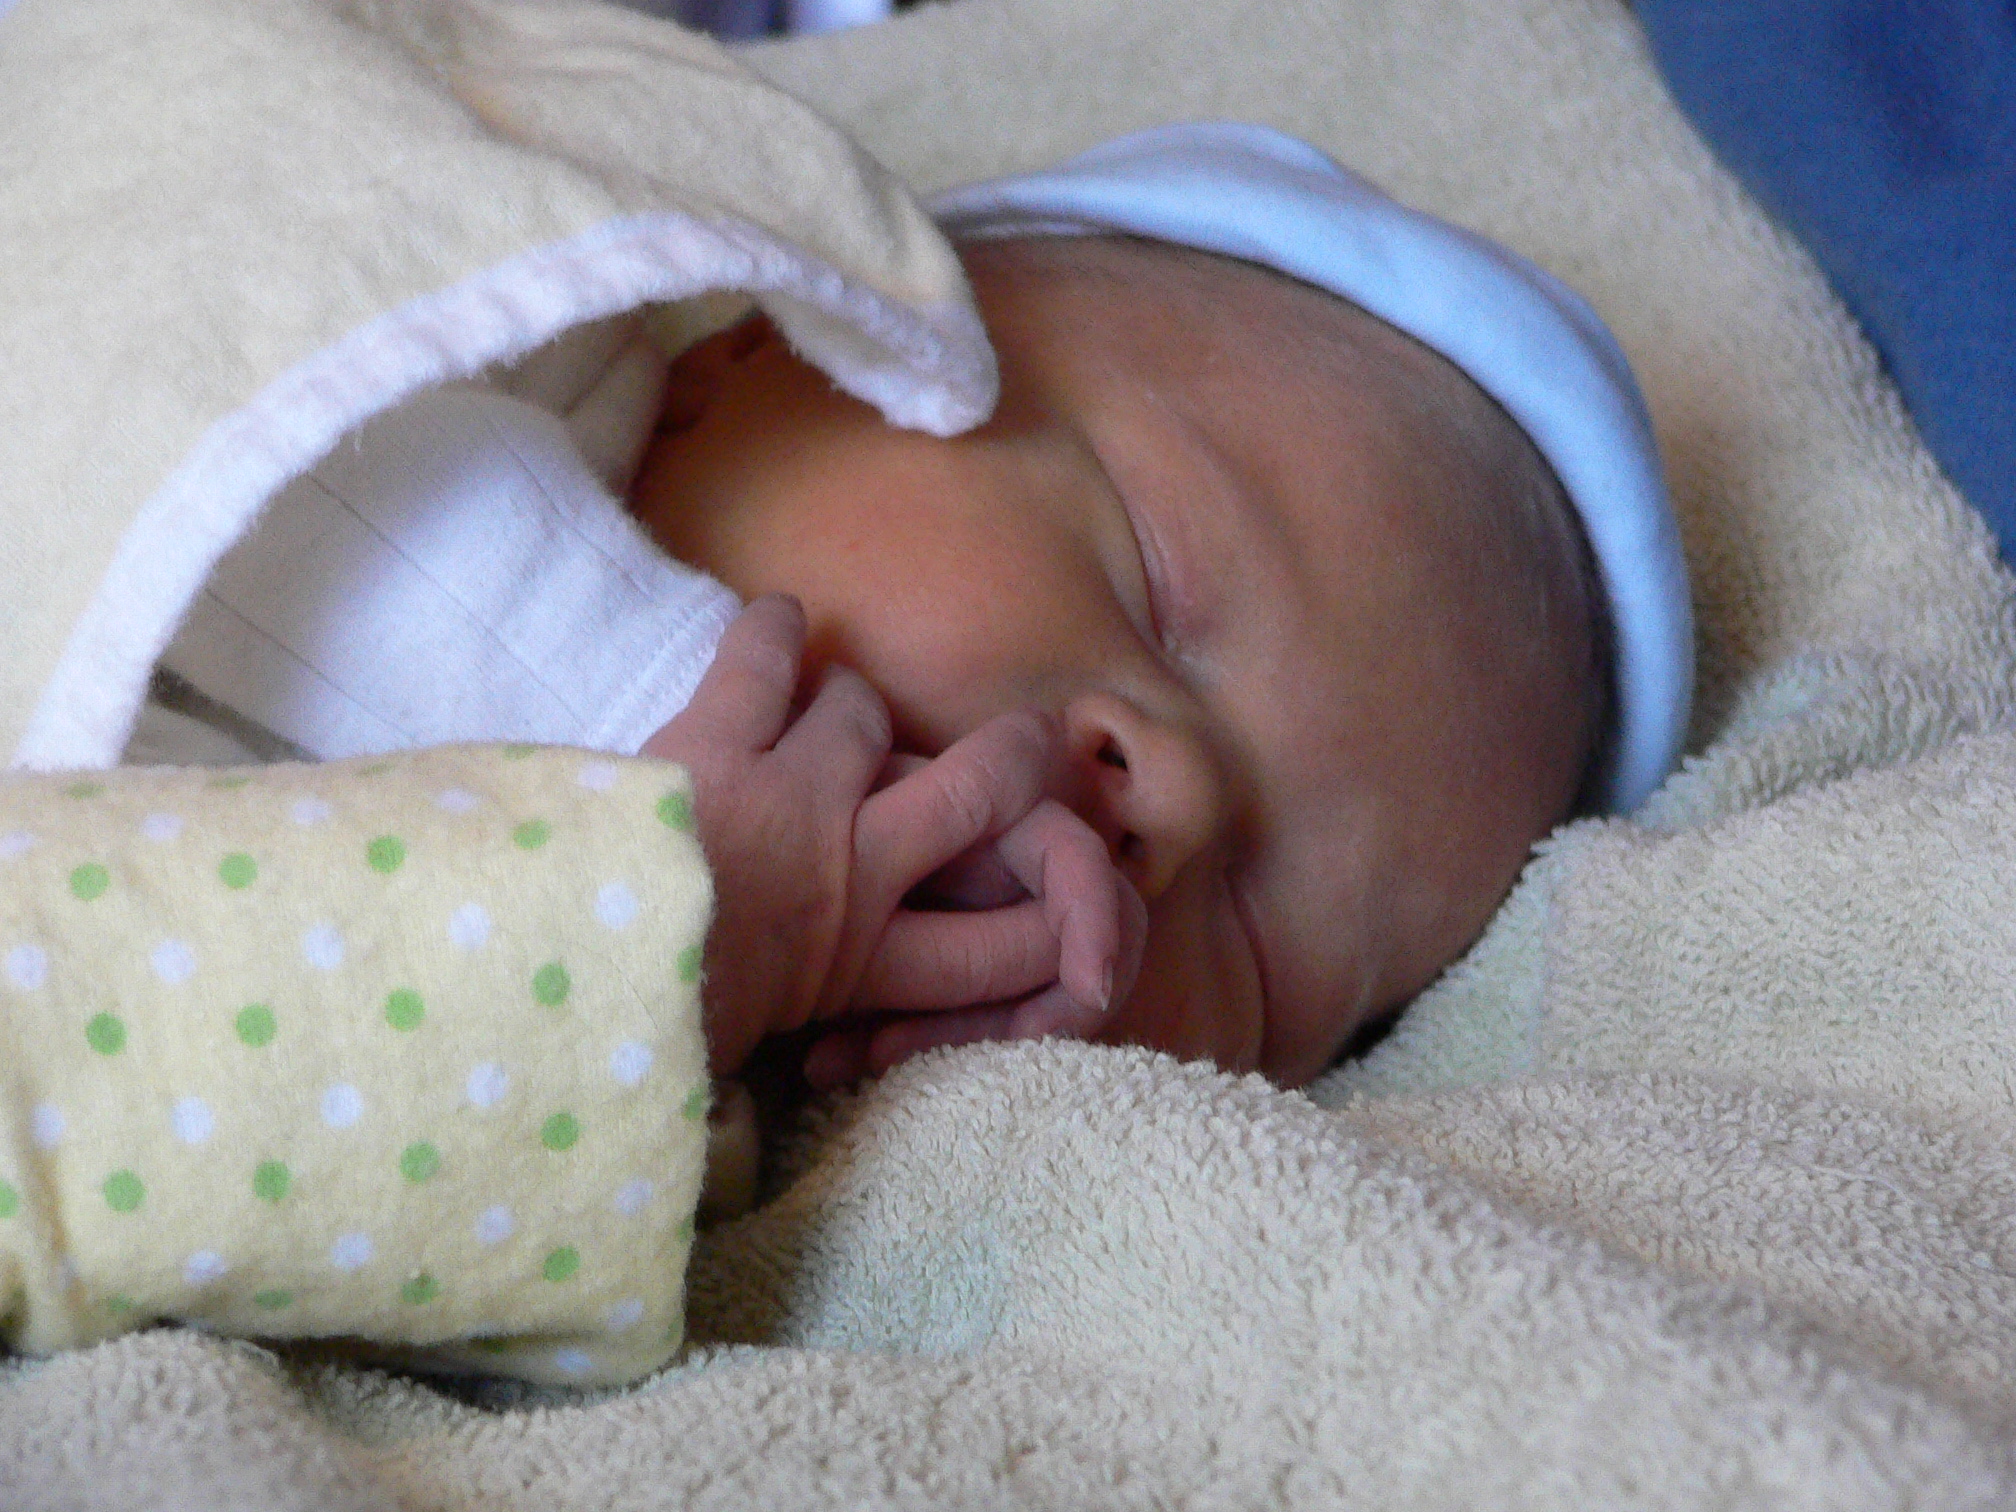 Jack Oliver McCallum (Jamie’s son), February 2009, in his first week